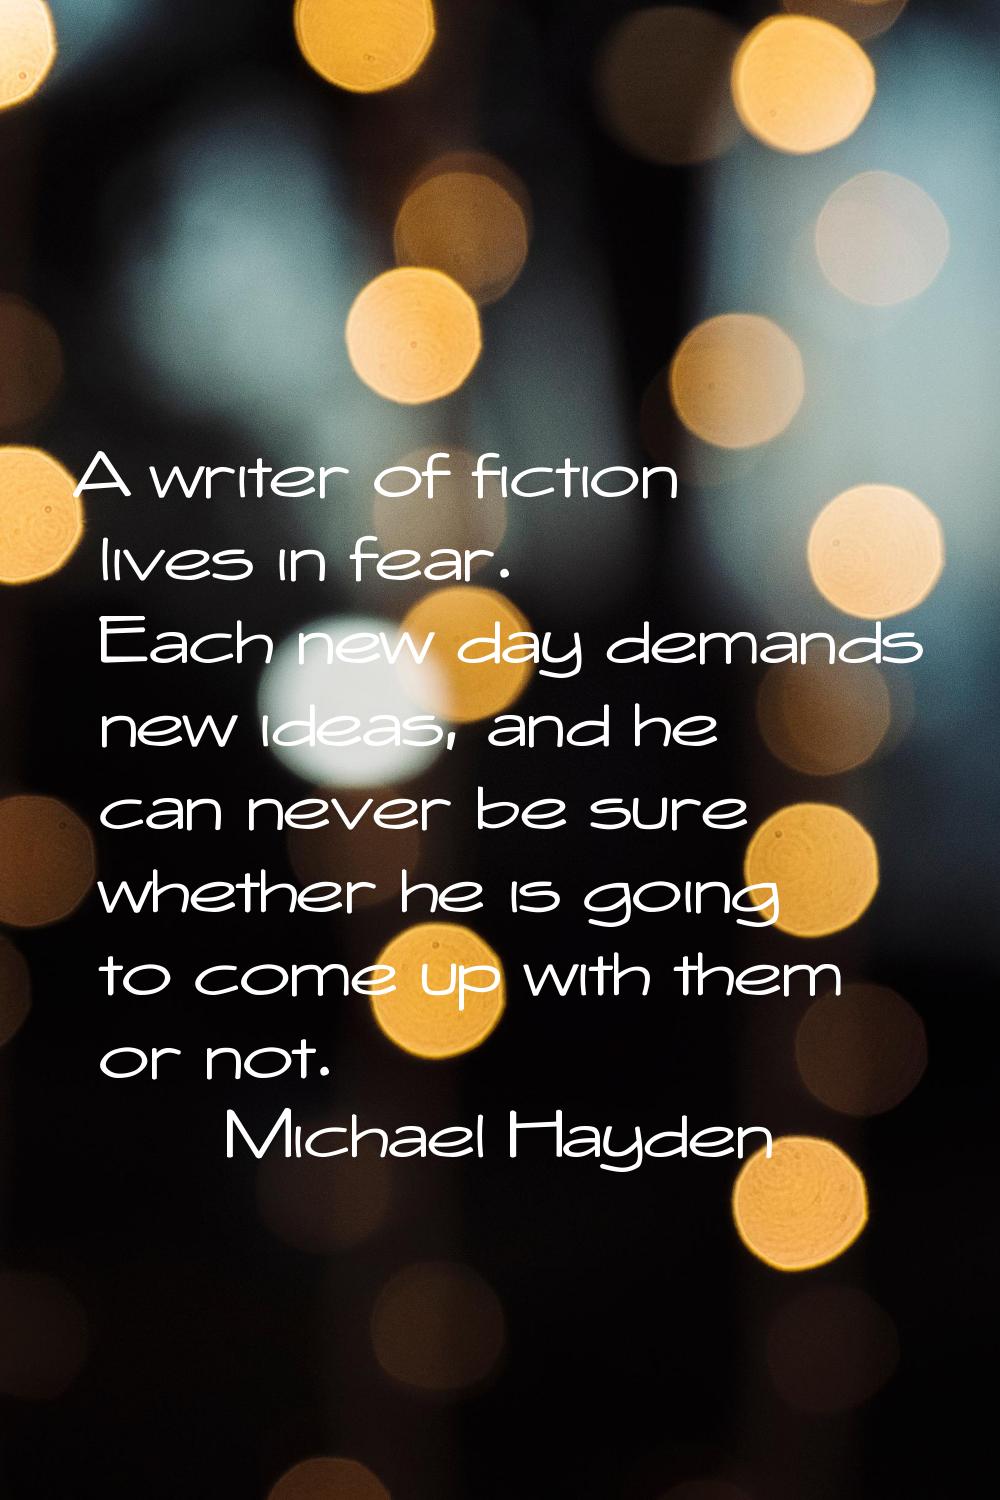 A writer of fiction lives in fear. Each new day demands new ideas, and he can never be sure whether